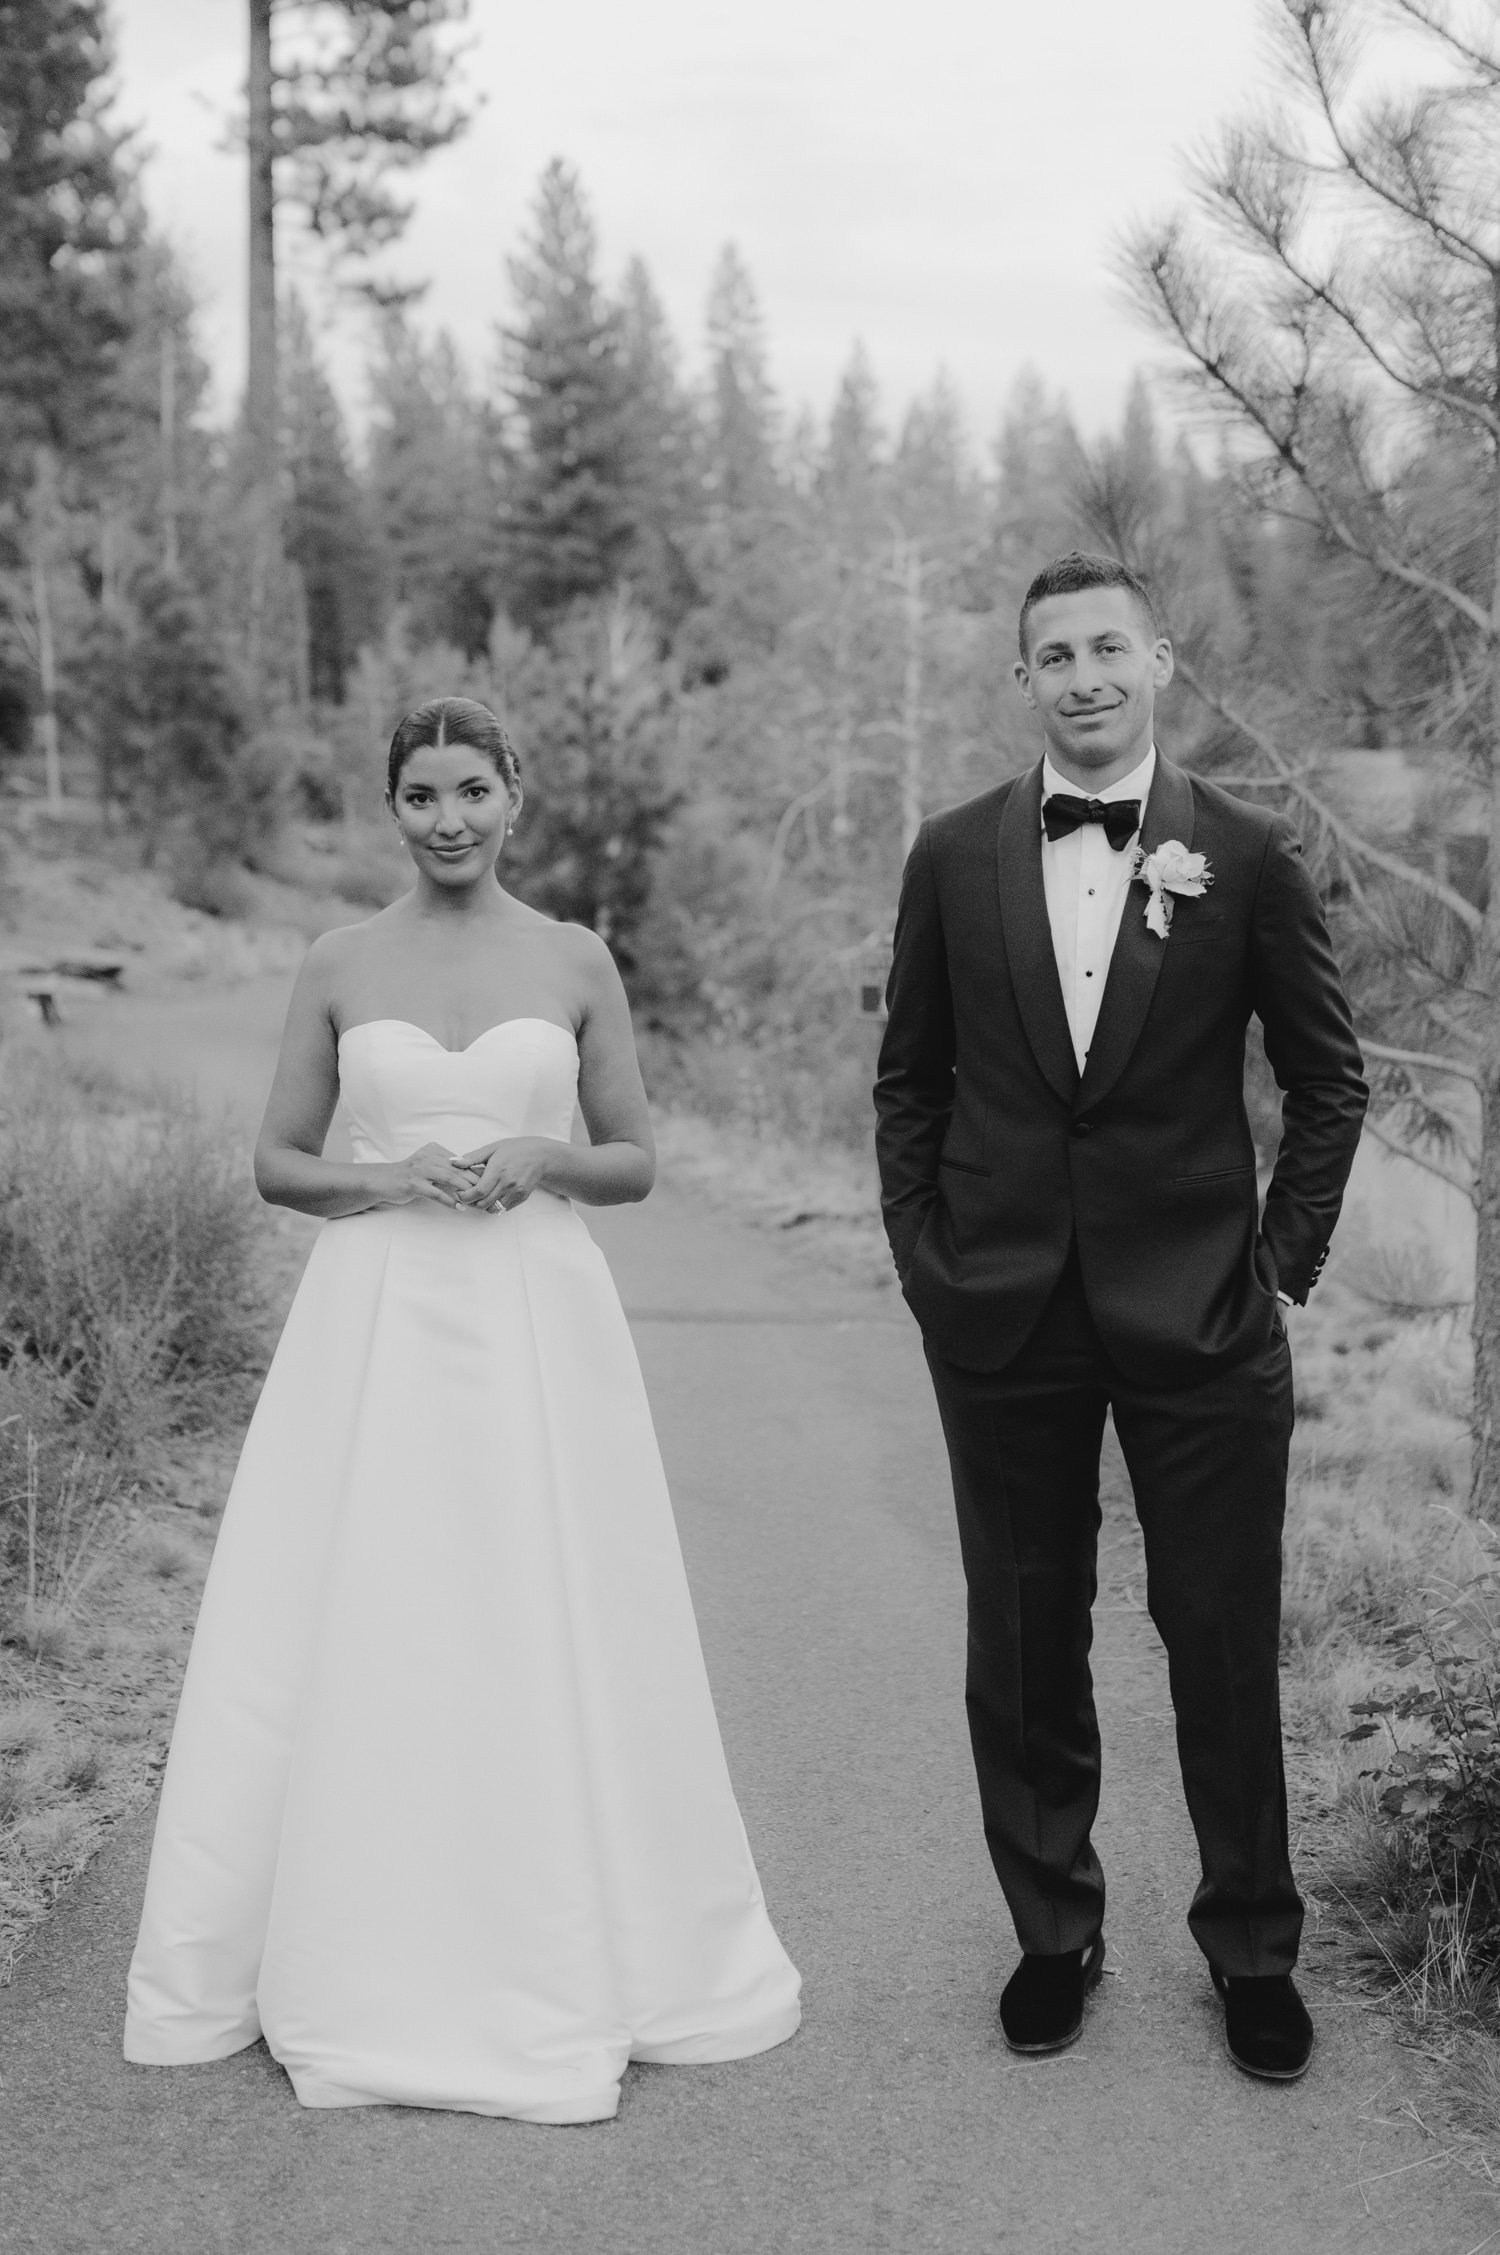 Martis Camp Wedding, photo of the bride and groom standing side by side